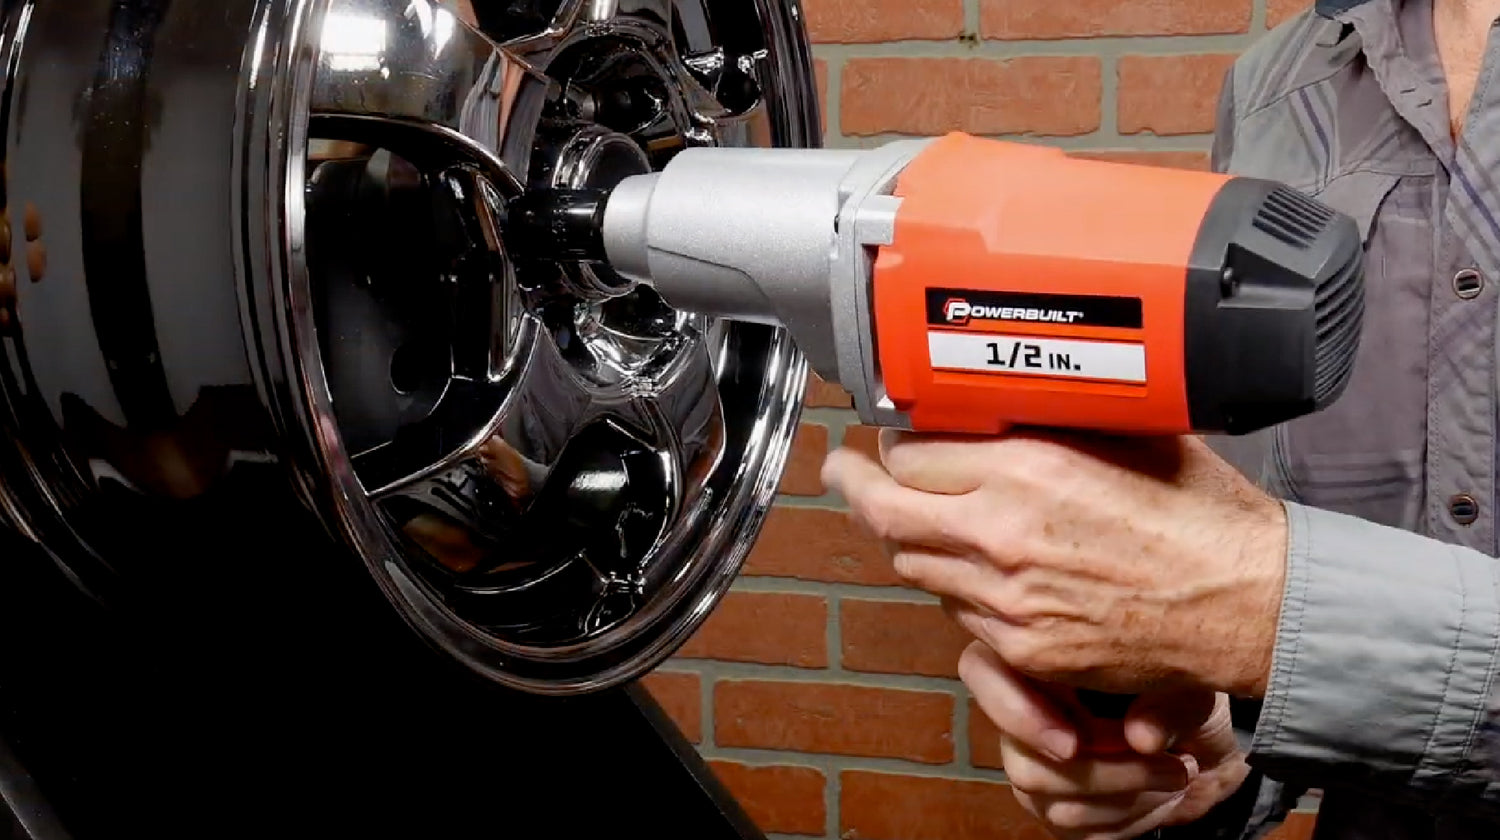 The Powerbuilt 1/2 in. 7.5 Amp Heavy Duty Impact Wrench